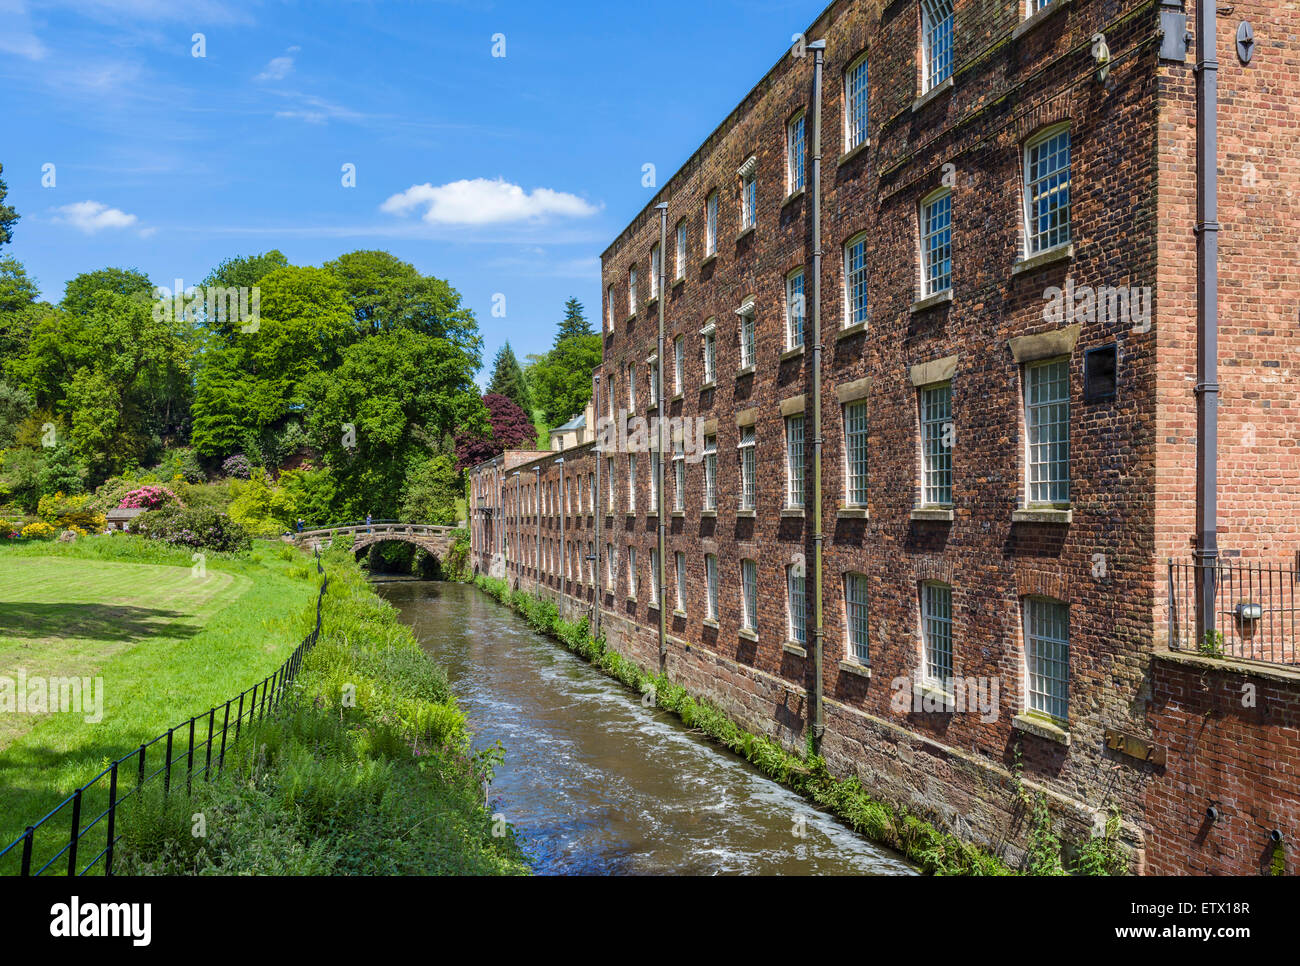 The River Bollin and Quarry Bank Mill, a historic 18thC textile mill in Styal, Cheshire, England, UK Stock Photo